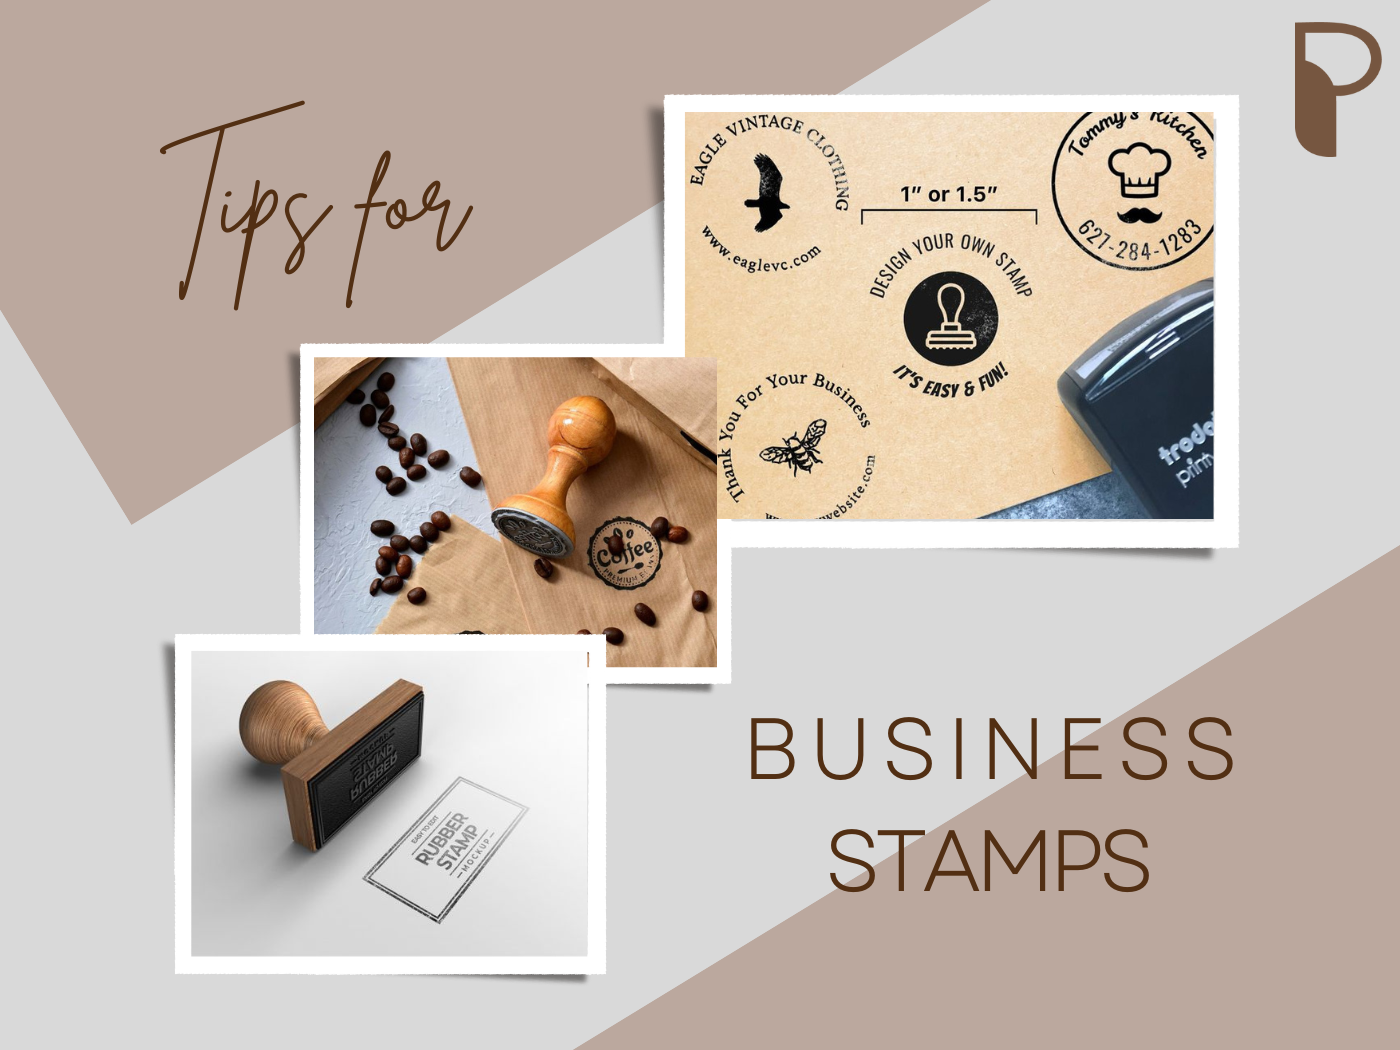 Getting The Best Custom Stamps for Your Business- Some Tips to